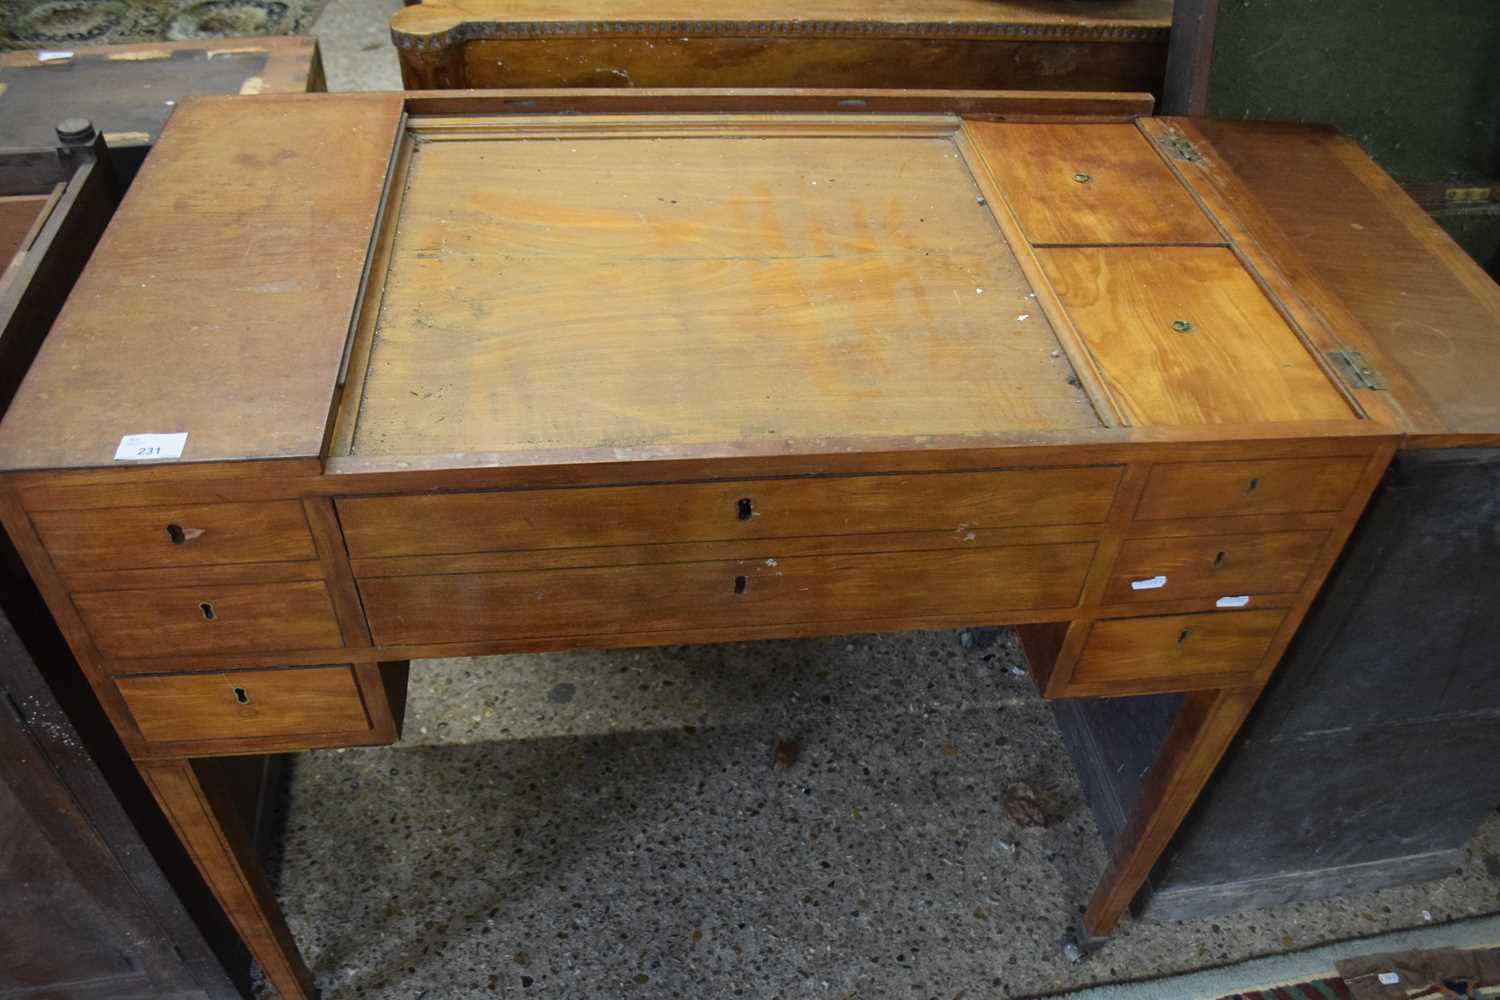 19th Century desk or dressing table with hinged side sections opening to small compartments with